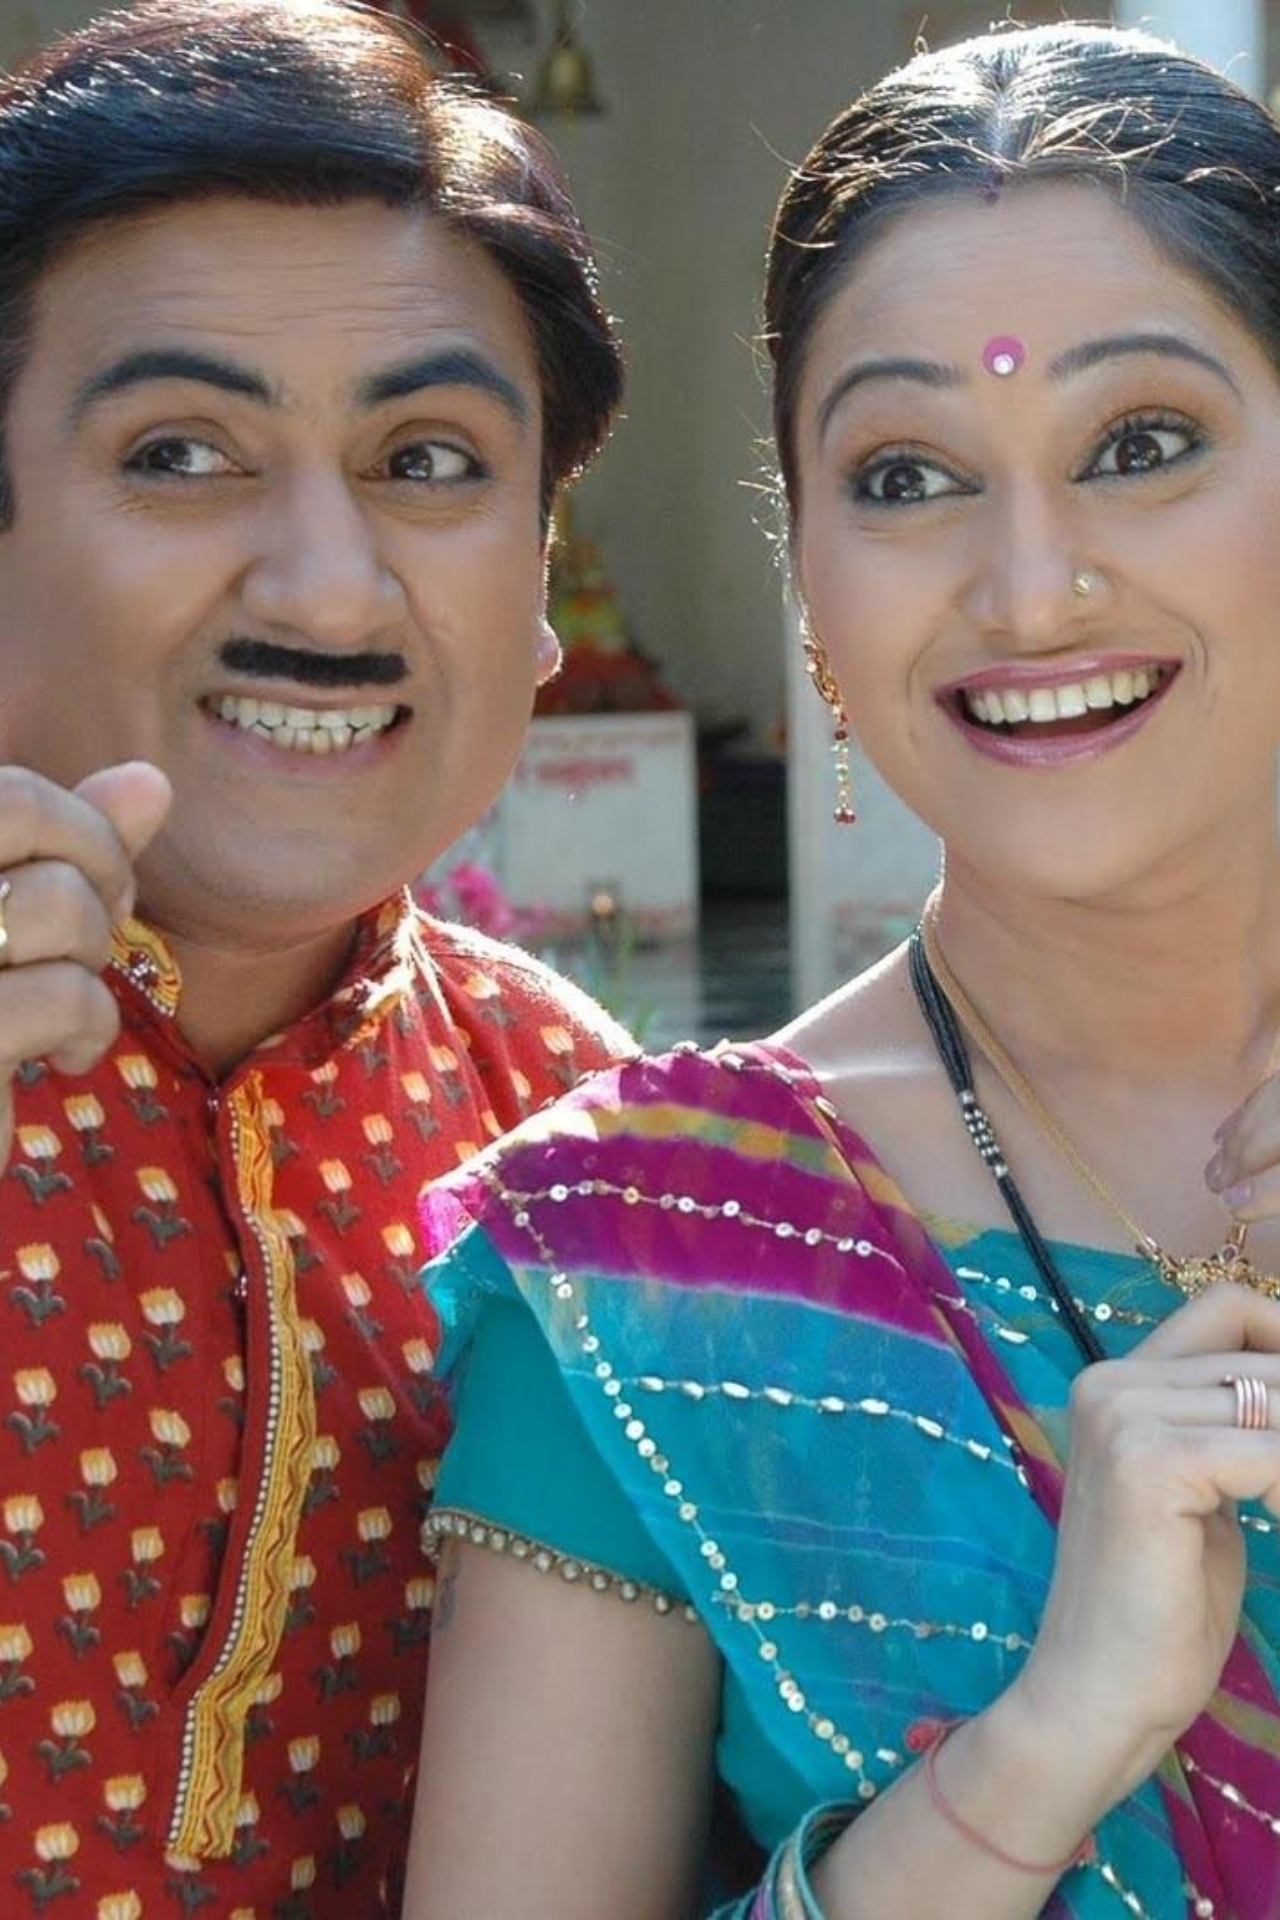 Tarak Mehta Ka Ooltah Chashmah is proof that one should surround yourself with people who keep your heart full of laughter.